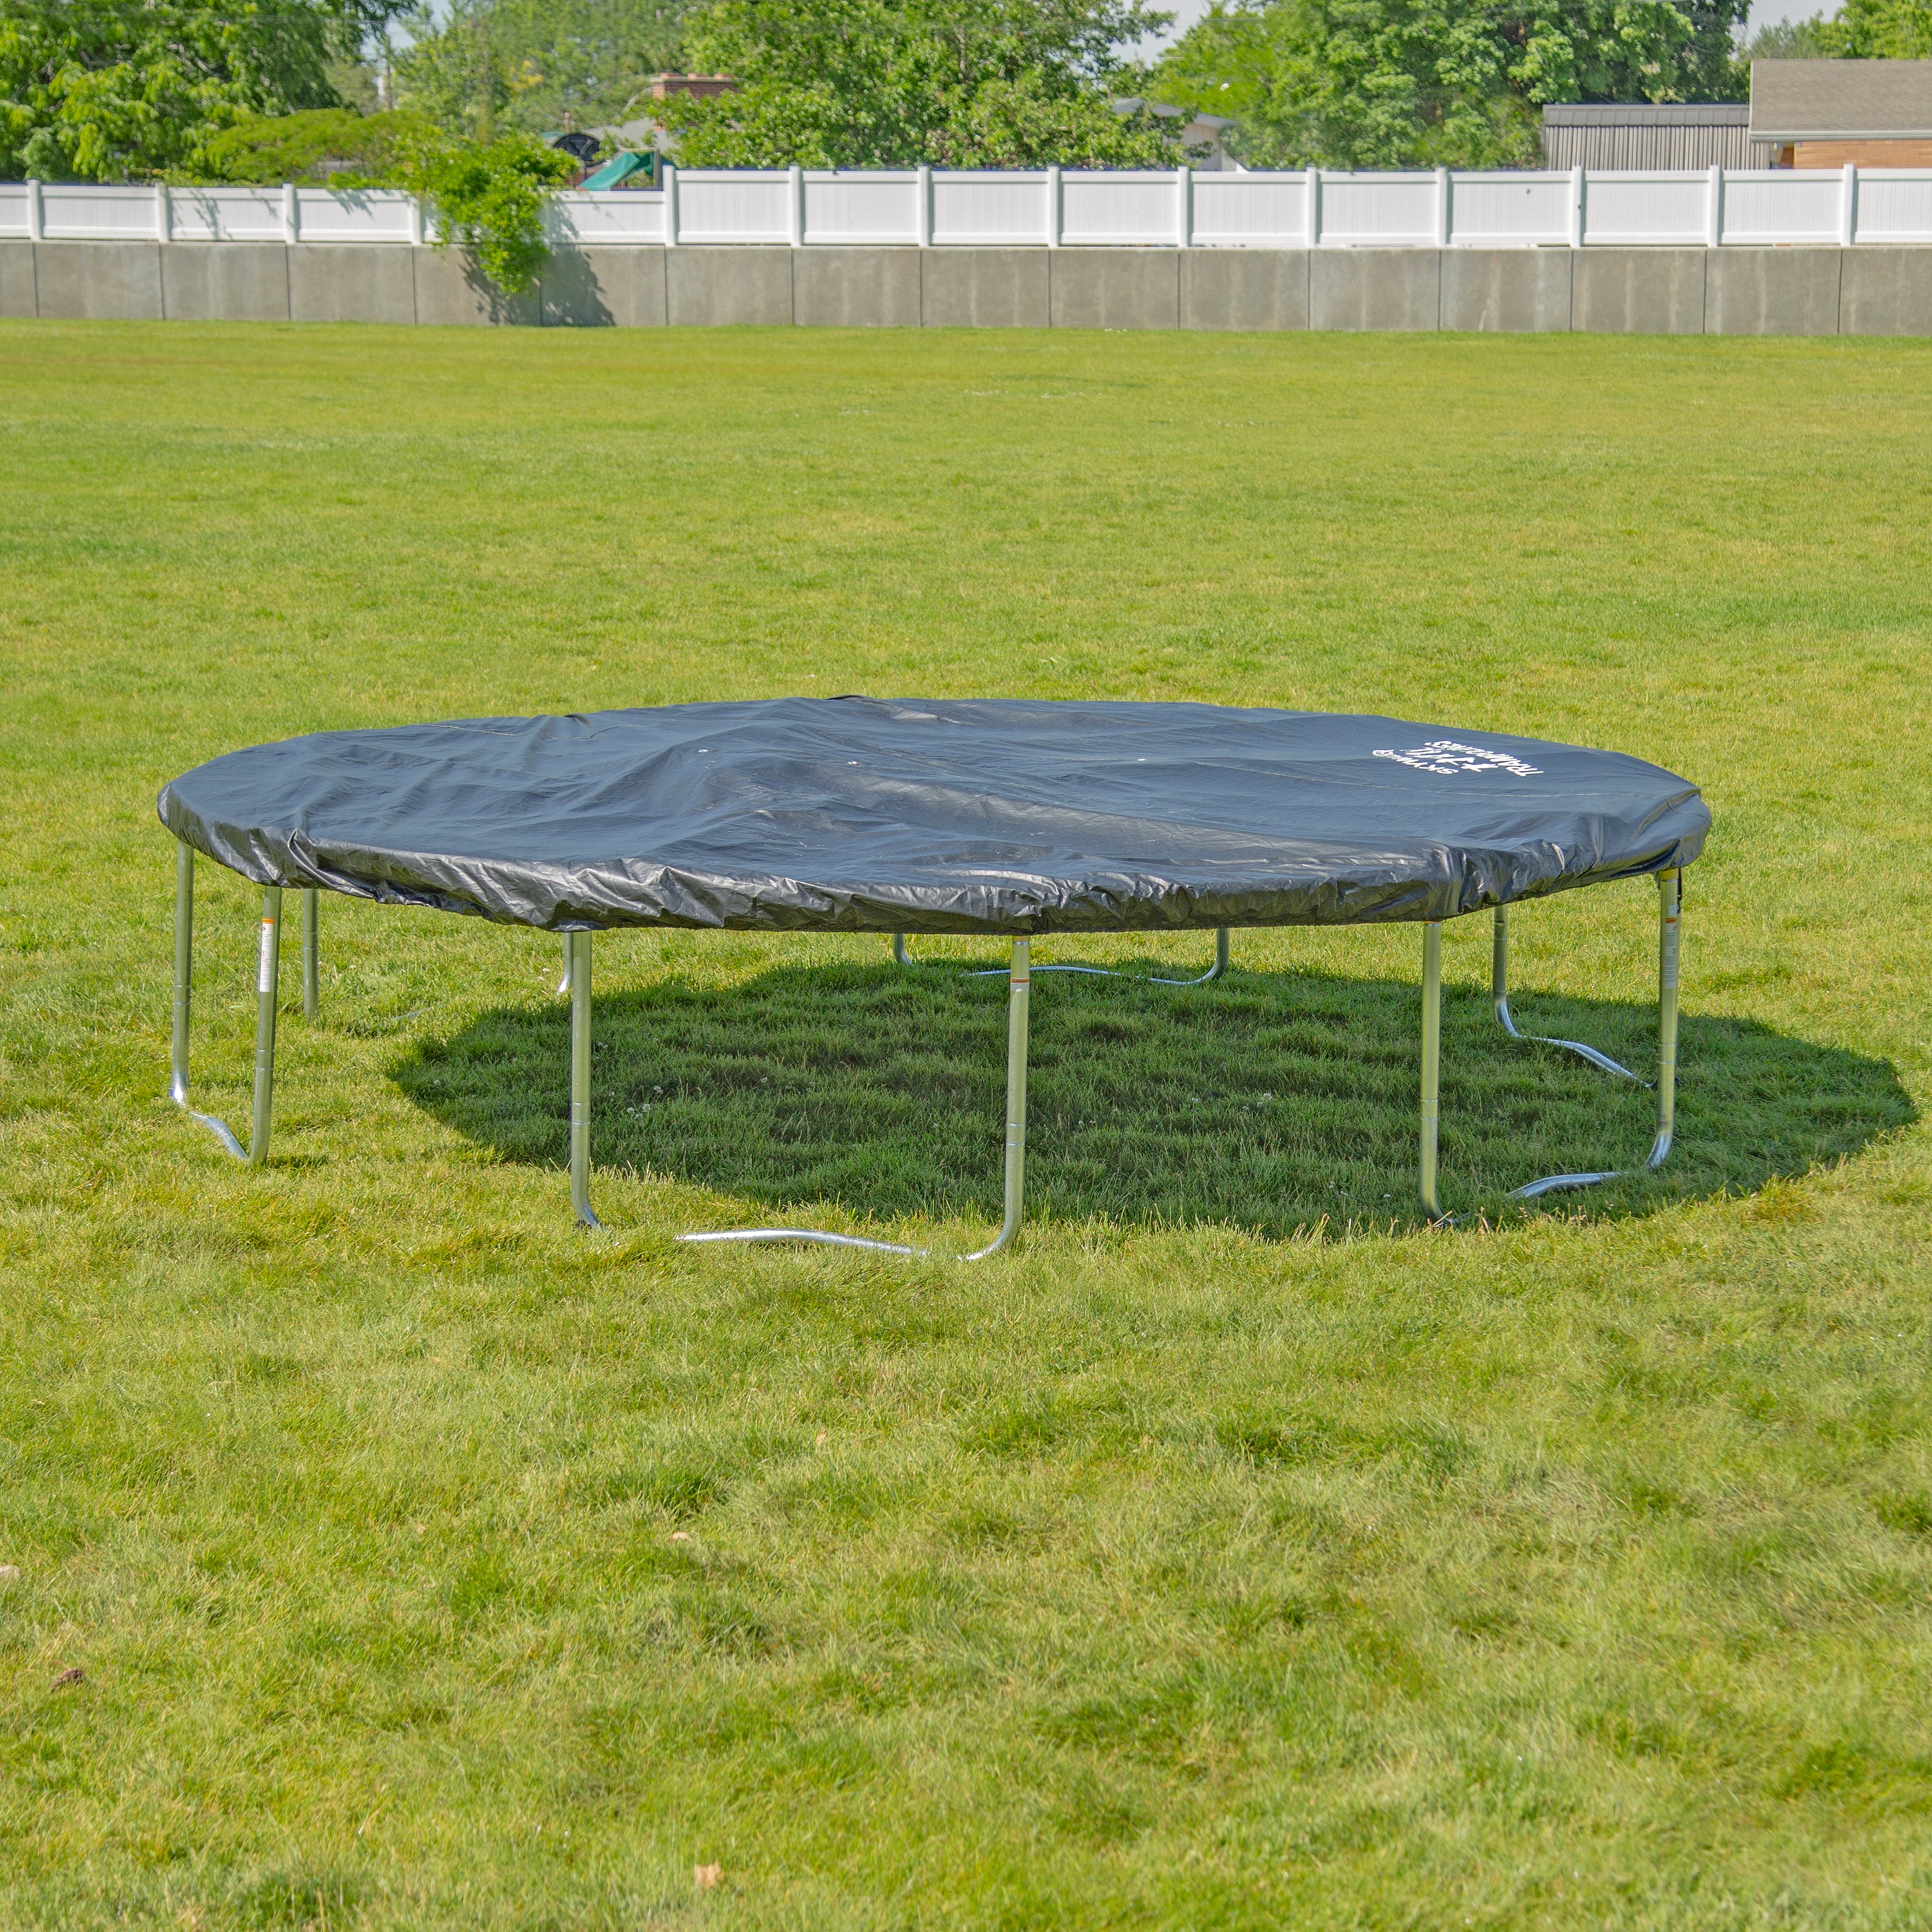 17-foot oval trampoline sits in grassy yard covered with the black weather cover. 